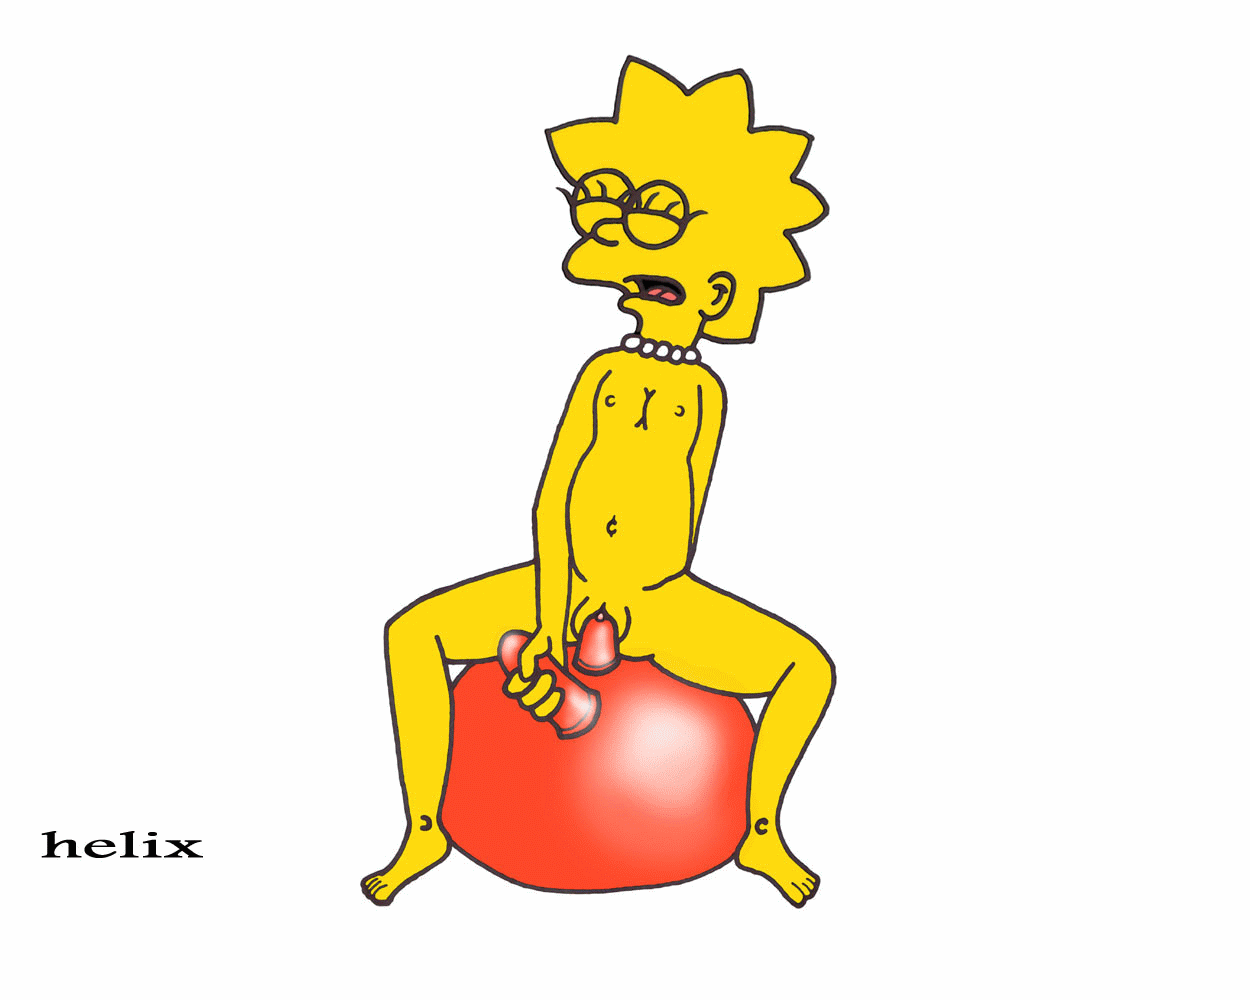 Nackt lisa simpsons The Simpsons